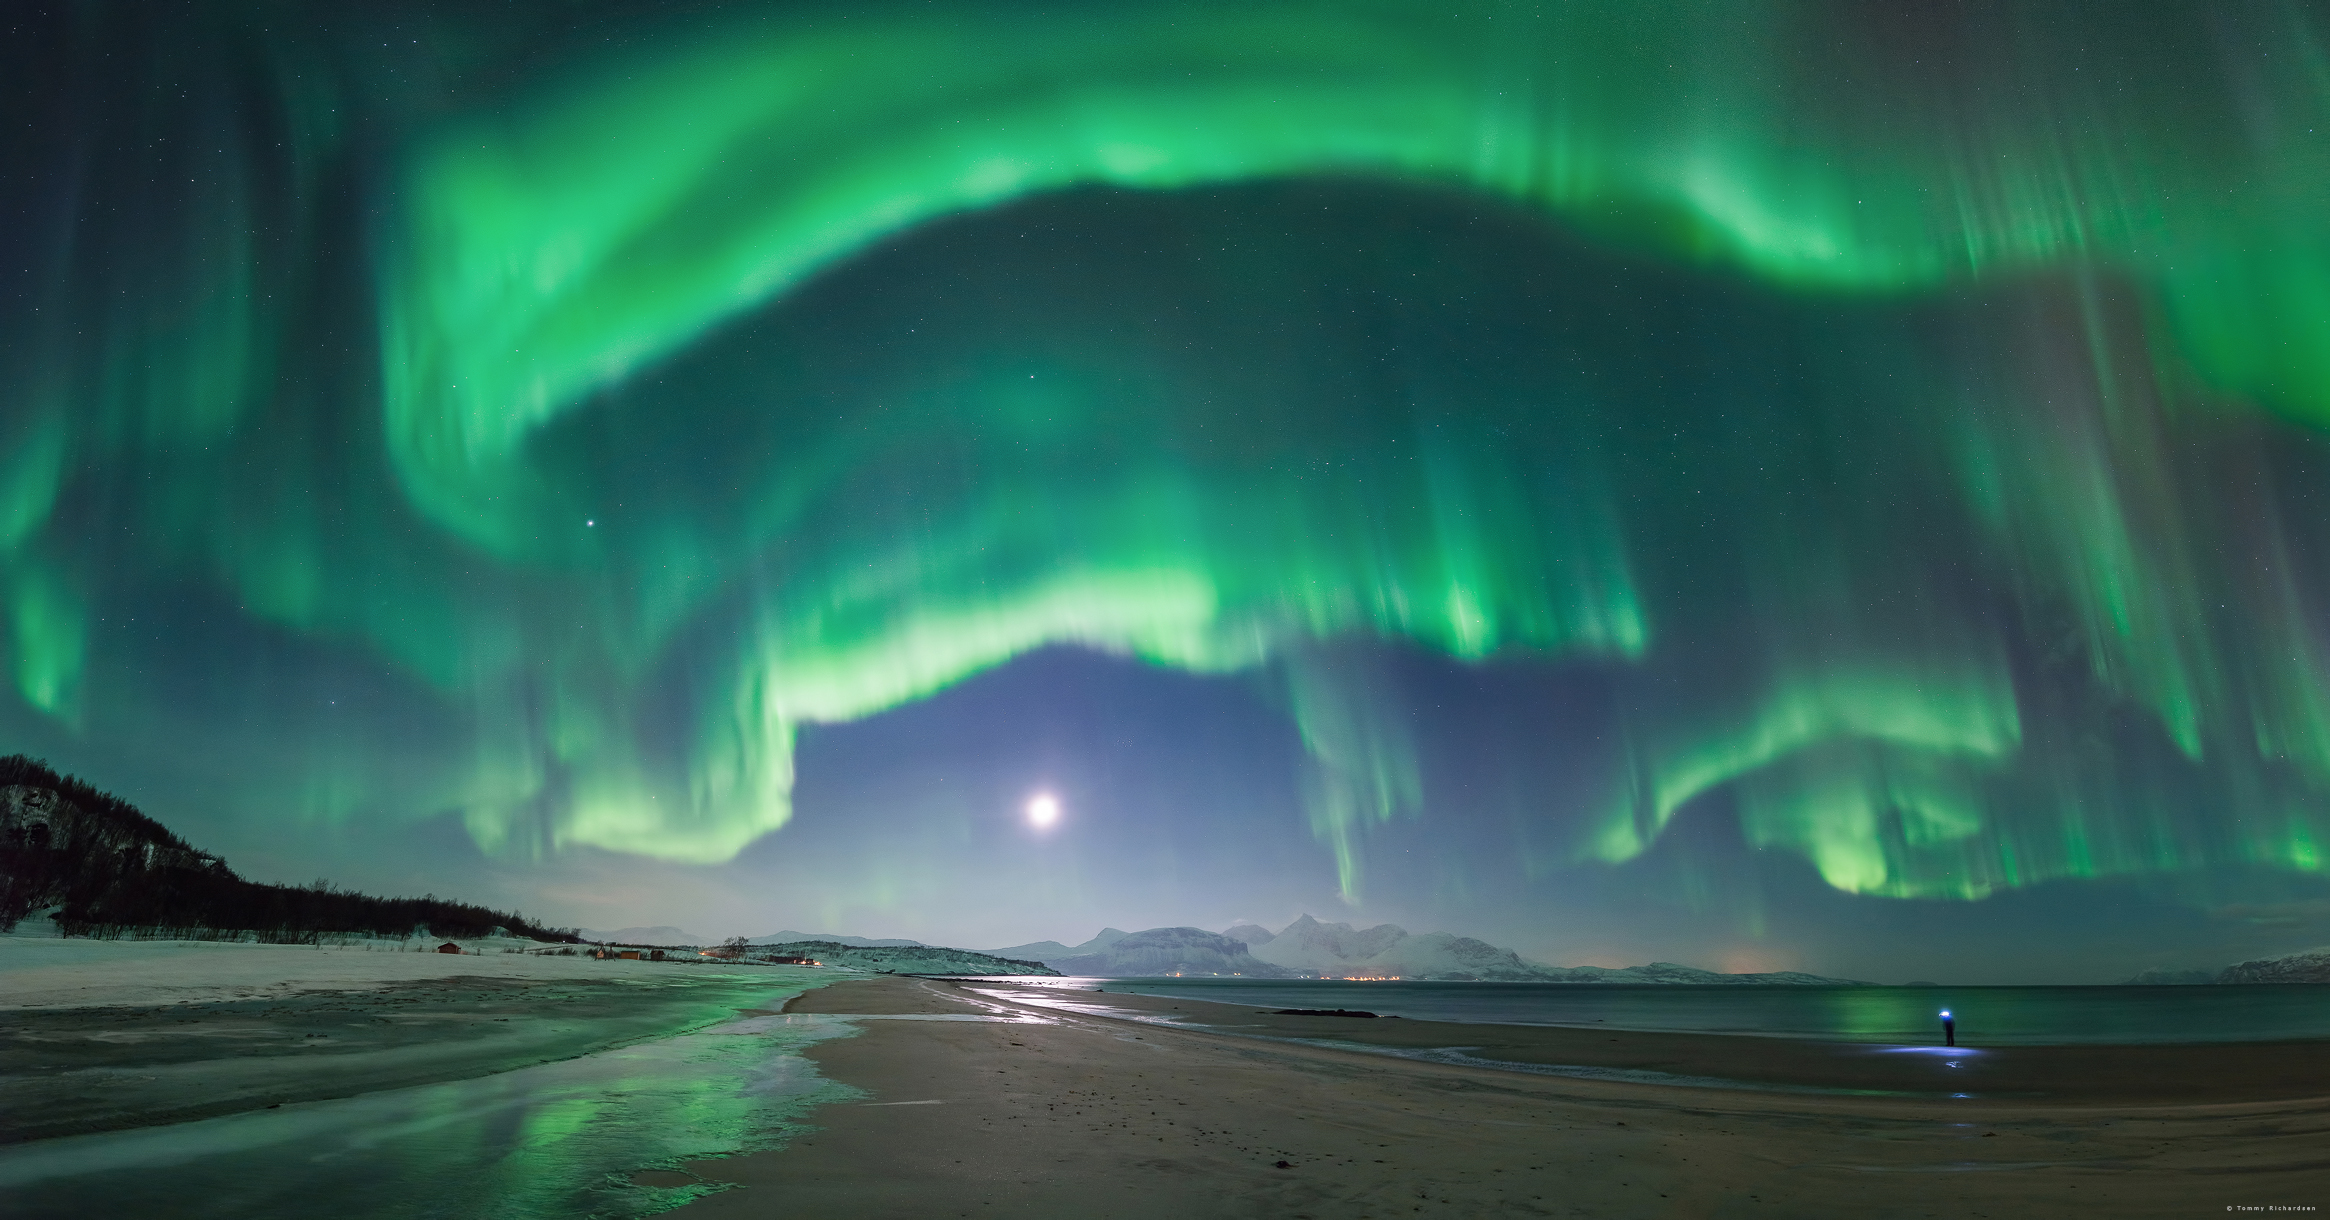 APOD: 2015 May 4 - An Unexpected Aurora over Norway